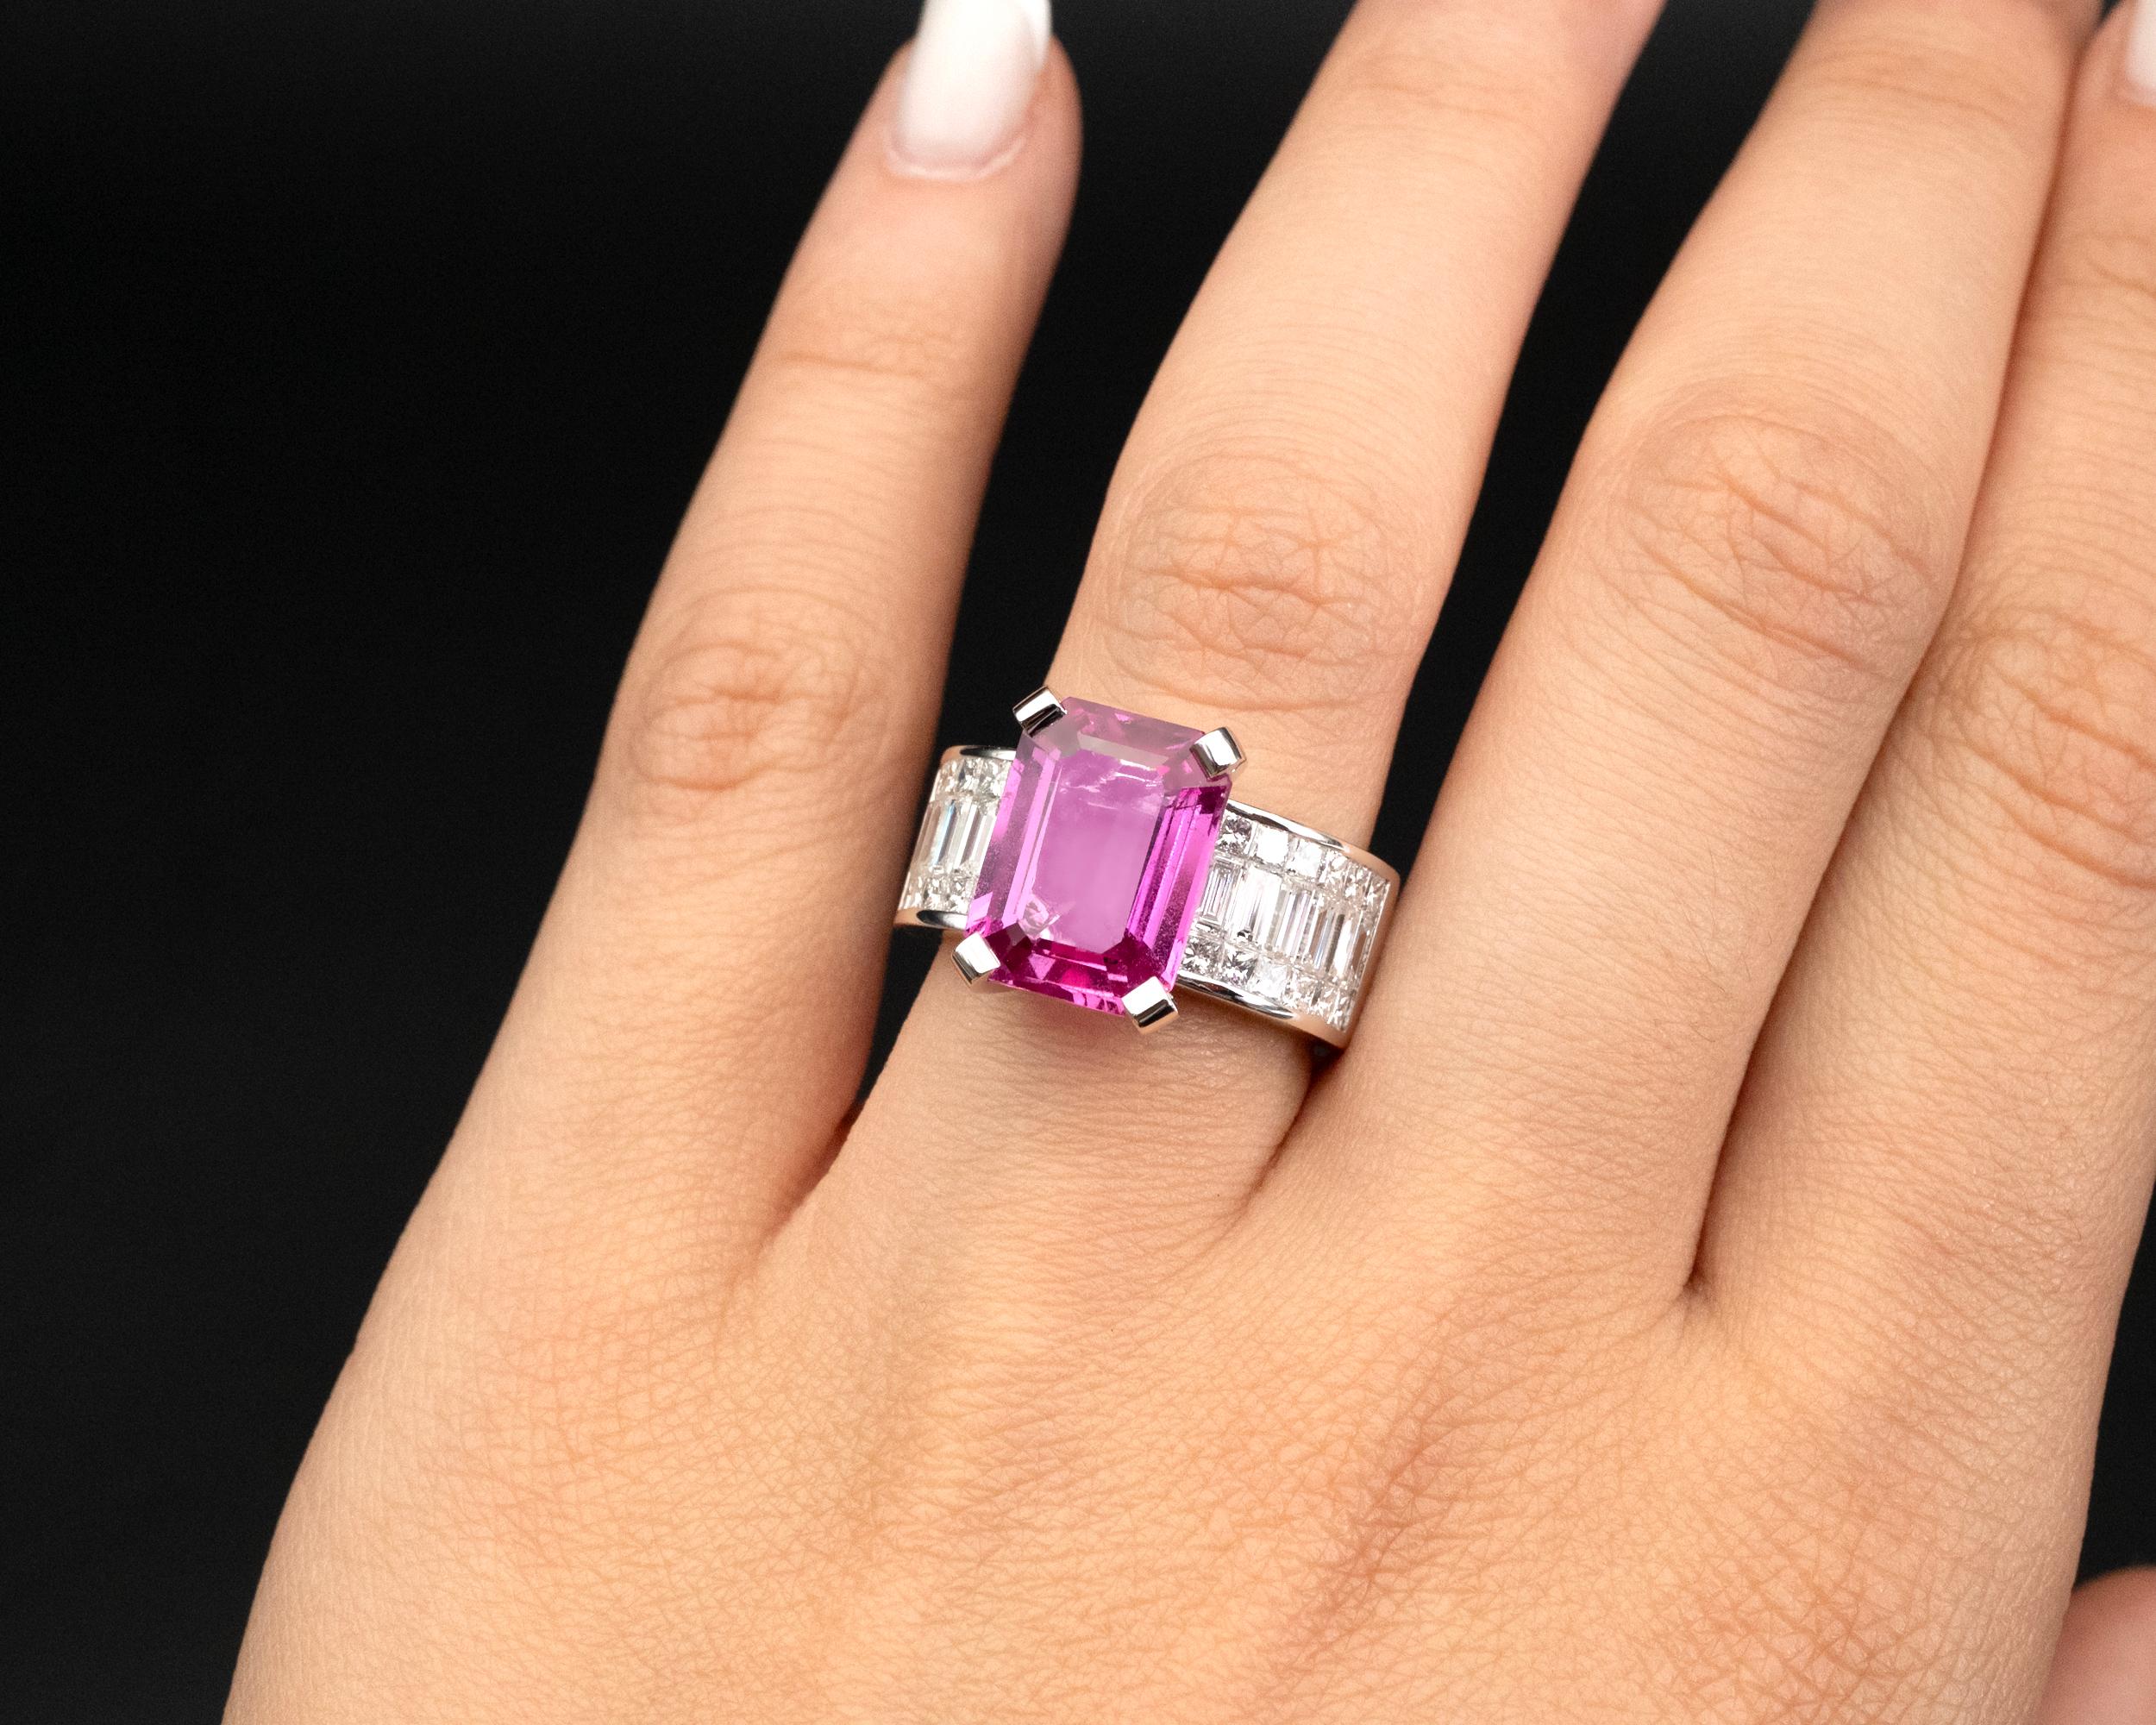 Natural Unheated Pink Sapphire weighing 6.20 cts, in modern 18KT white gold rand diamond ring. The baguette and princess cut diamonds are set with the invisible setting technique designing a striking pattern. The emerald-cut ( octagonal ) Sapphire